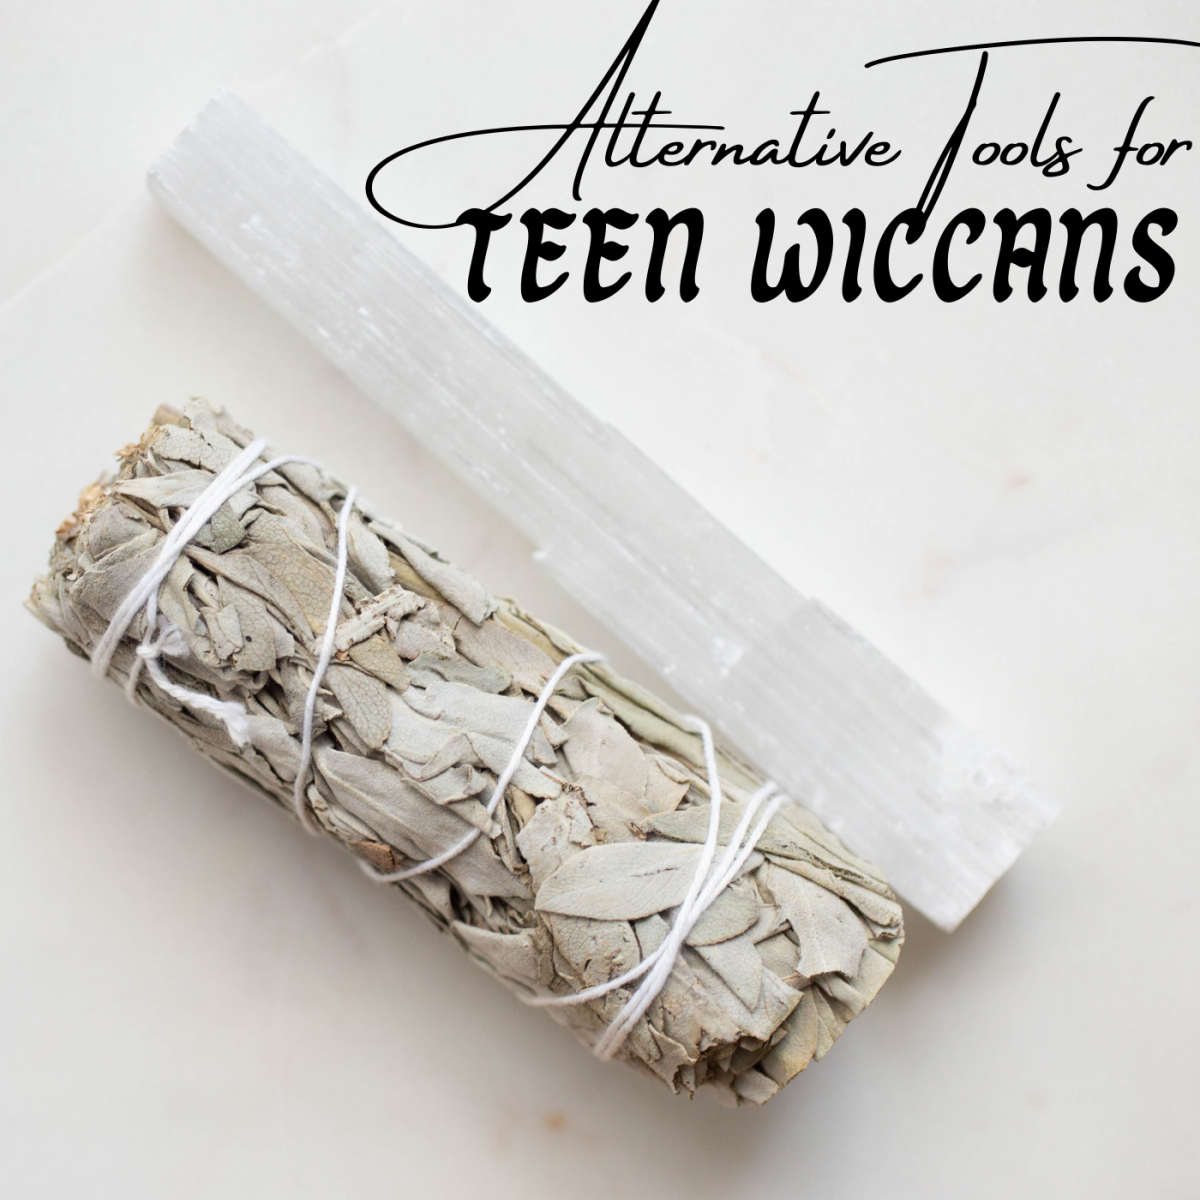 You don't need special tools to practice Wicca!